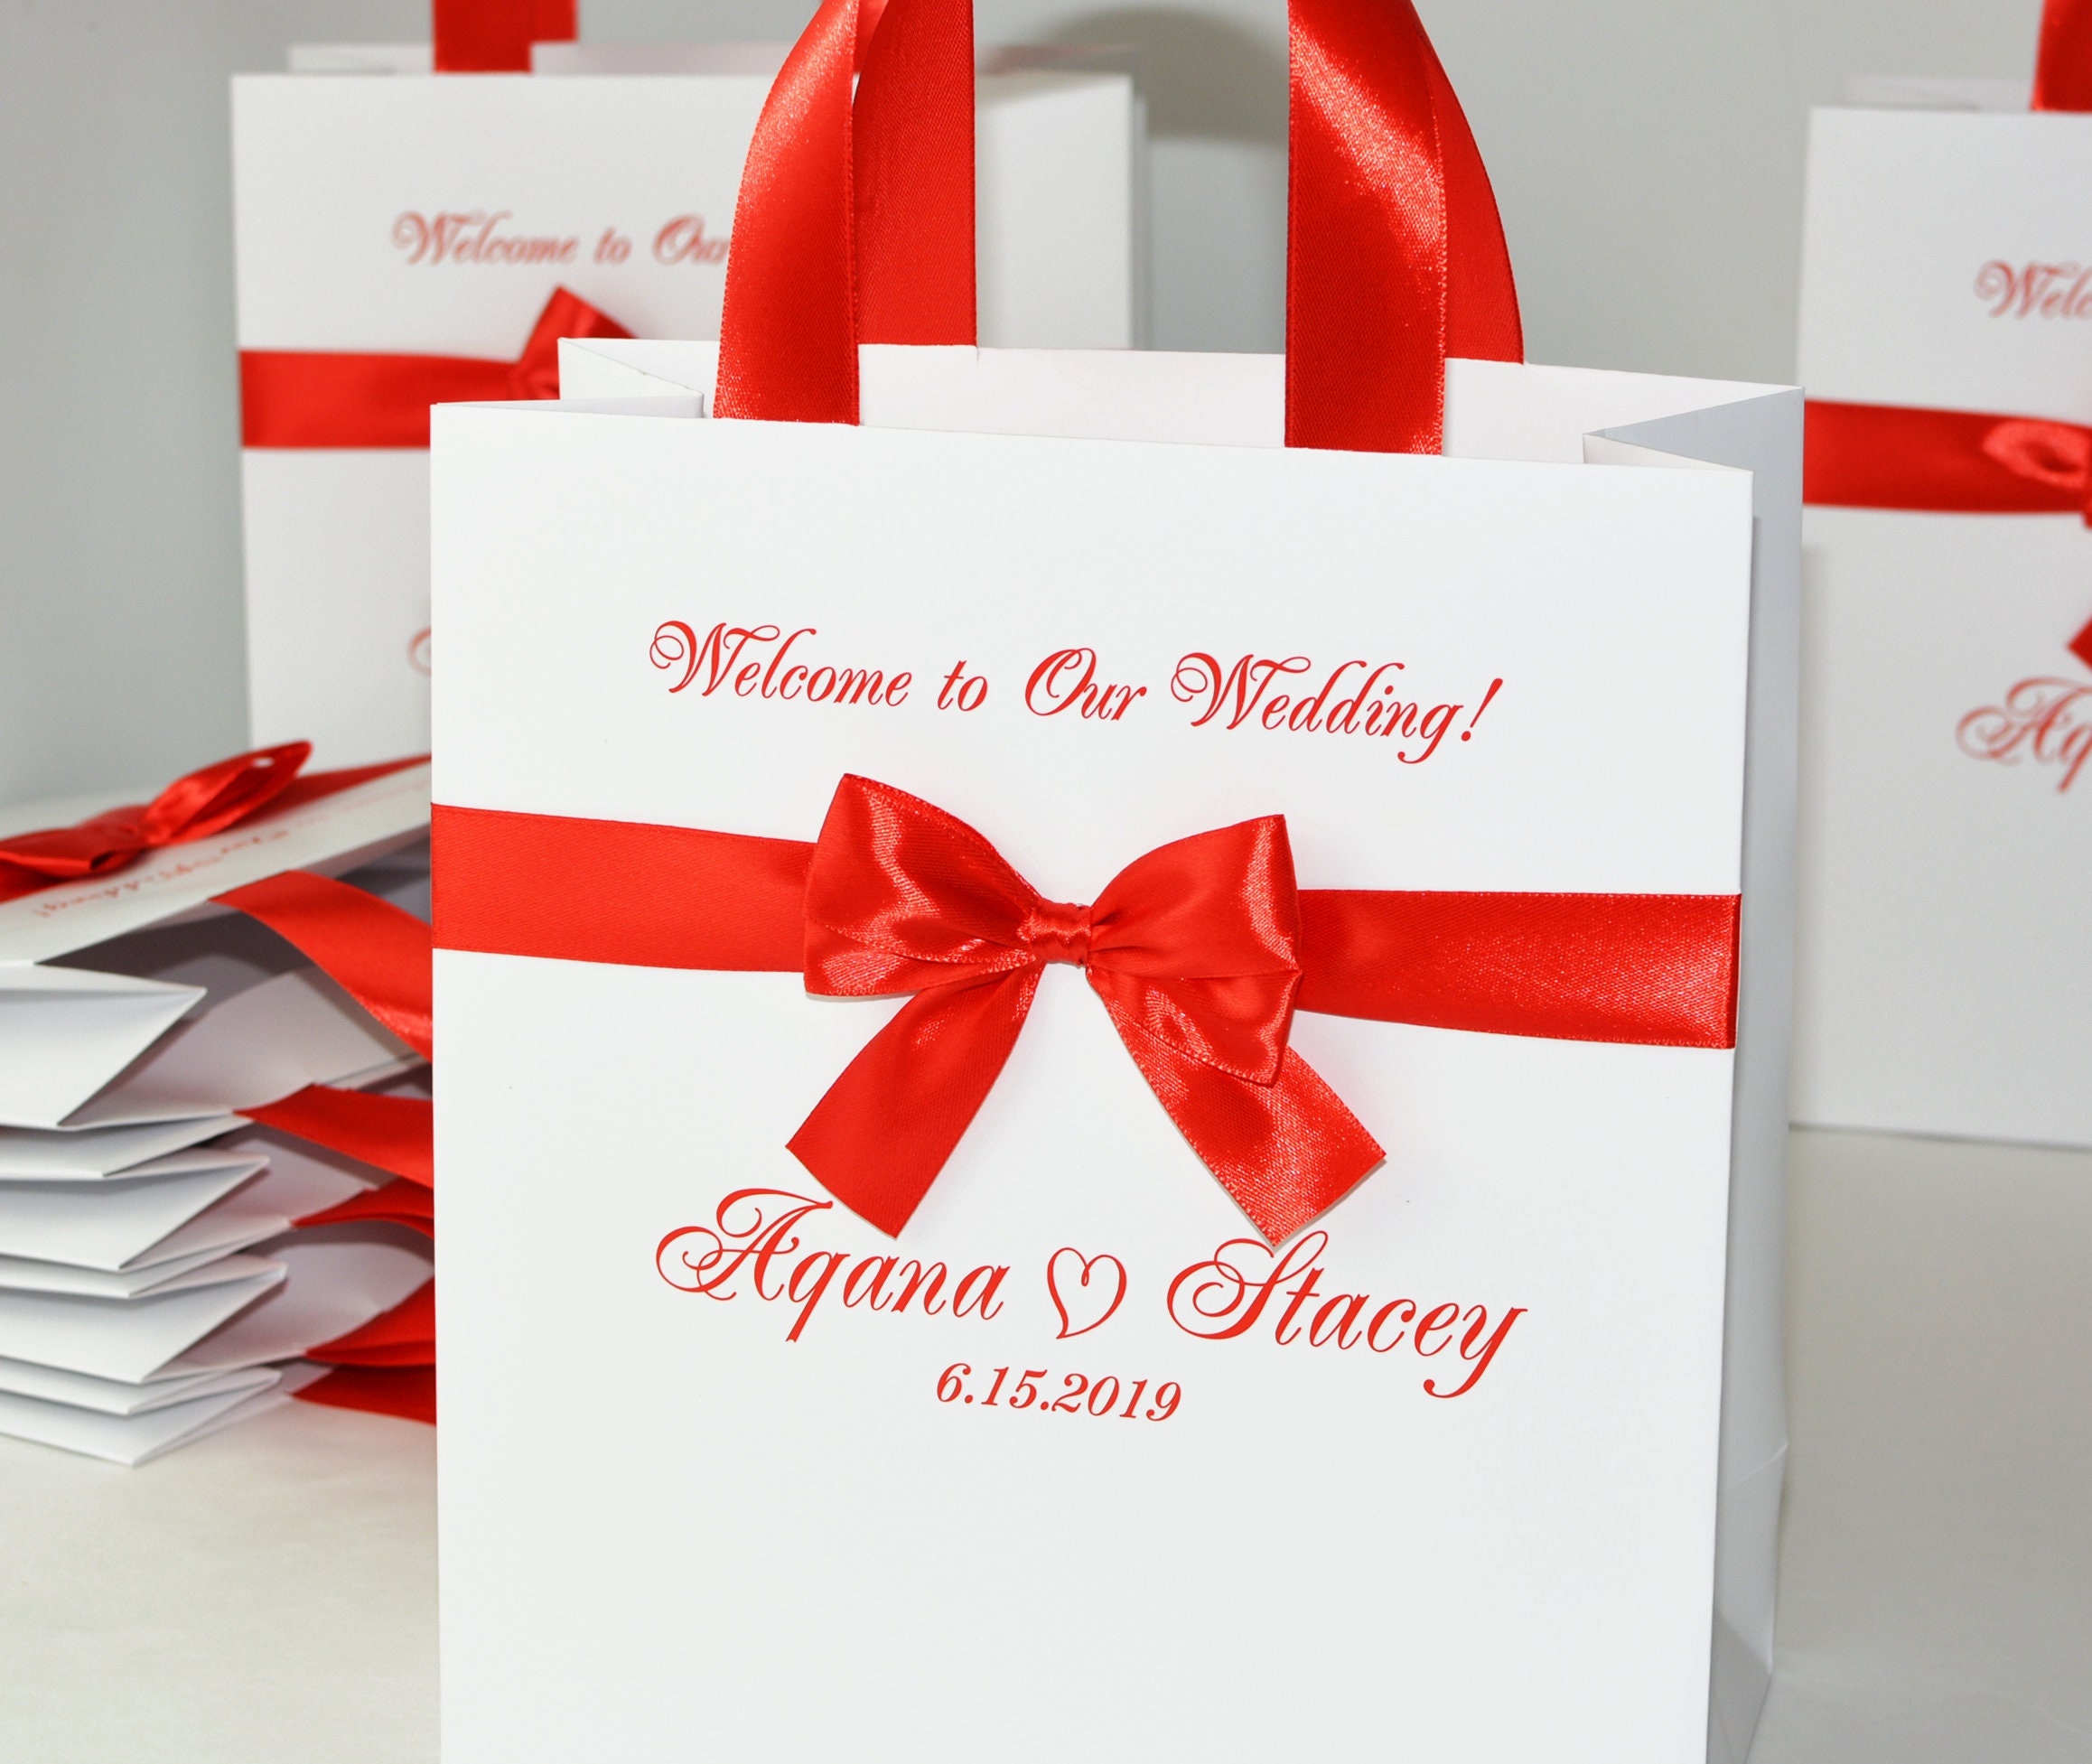 40 Ivory Wedding Welcome Bags With Satin Ribbon Handles and 